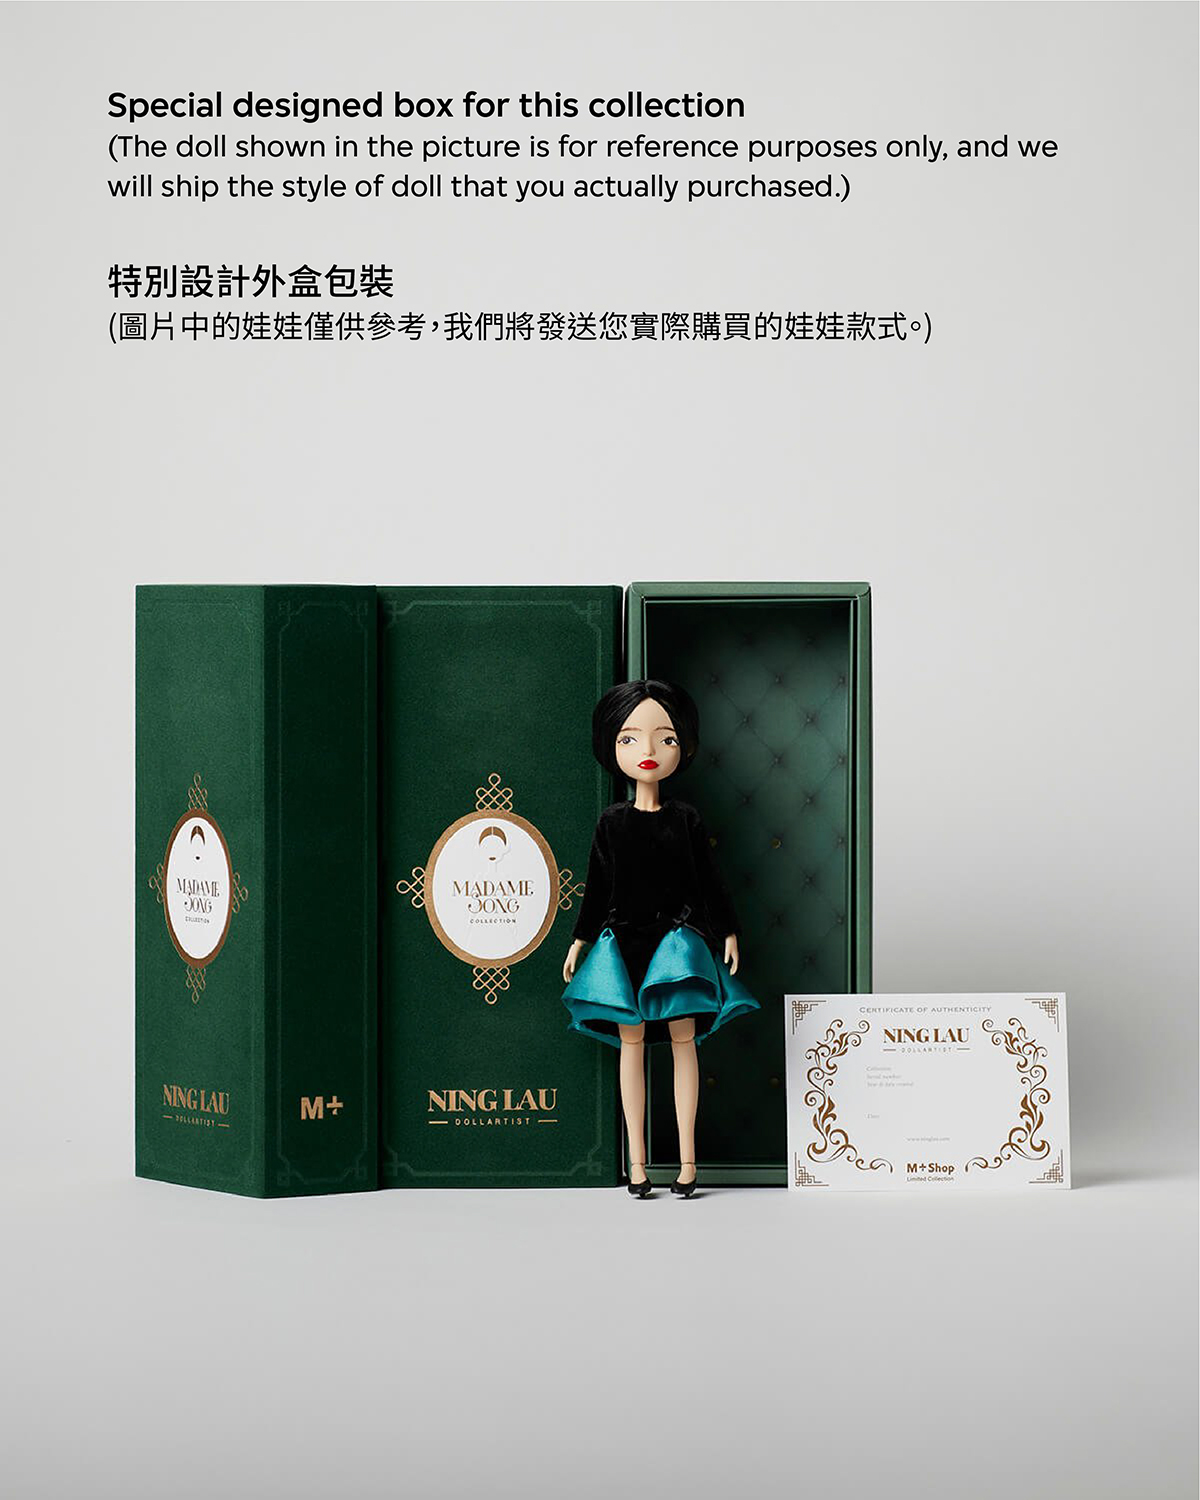 Ning Lau Handmade Doll - Dress With Turquoise Pleat